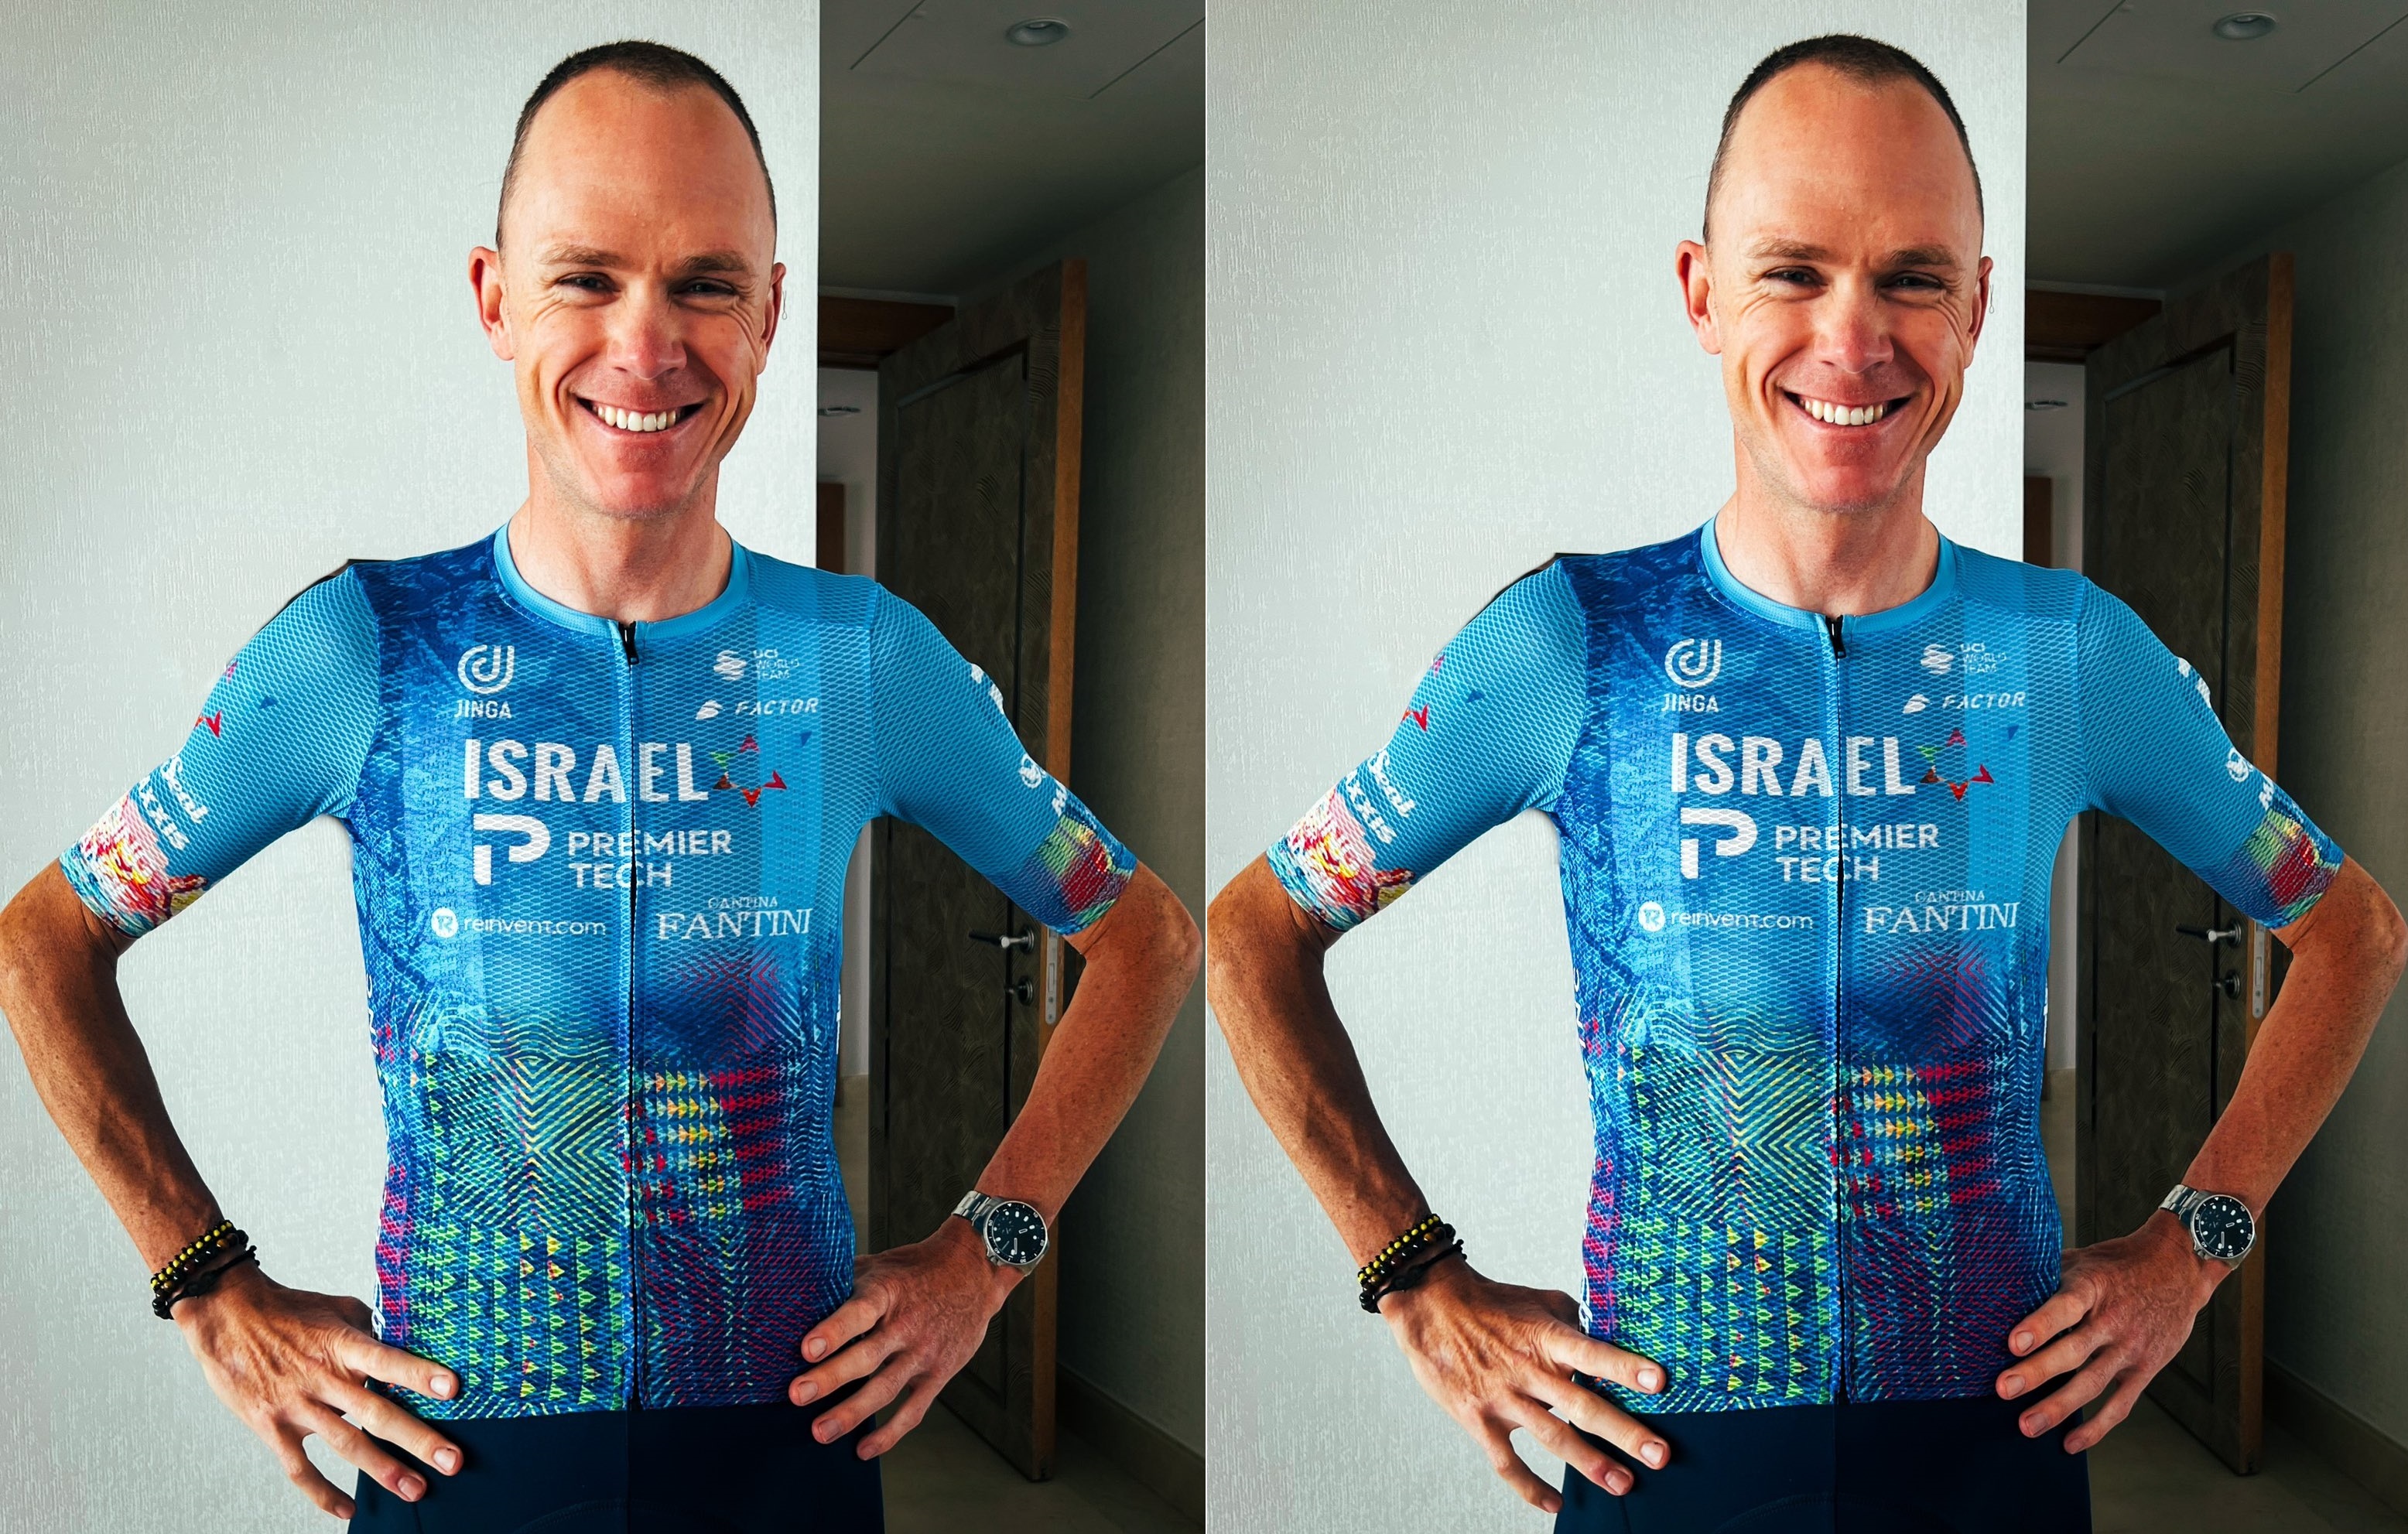 Chris Froome who currently rides for Israel-Premier Tech Cycling team has joined the campaign of his team that is soliciting for funds to build an ultra-modern academy in District of Bugesera in Rwanda.Courtesy